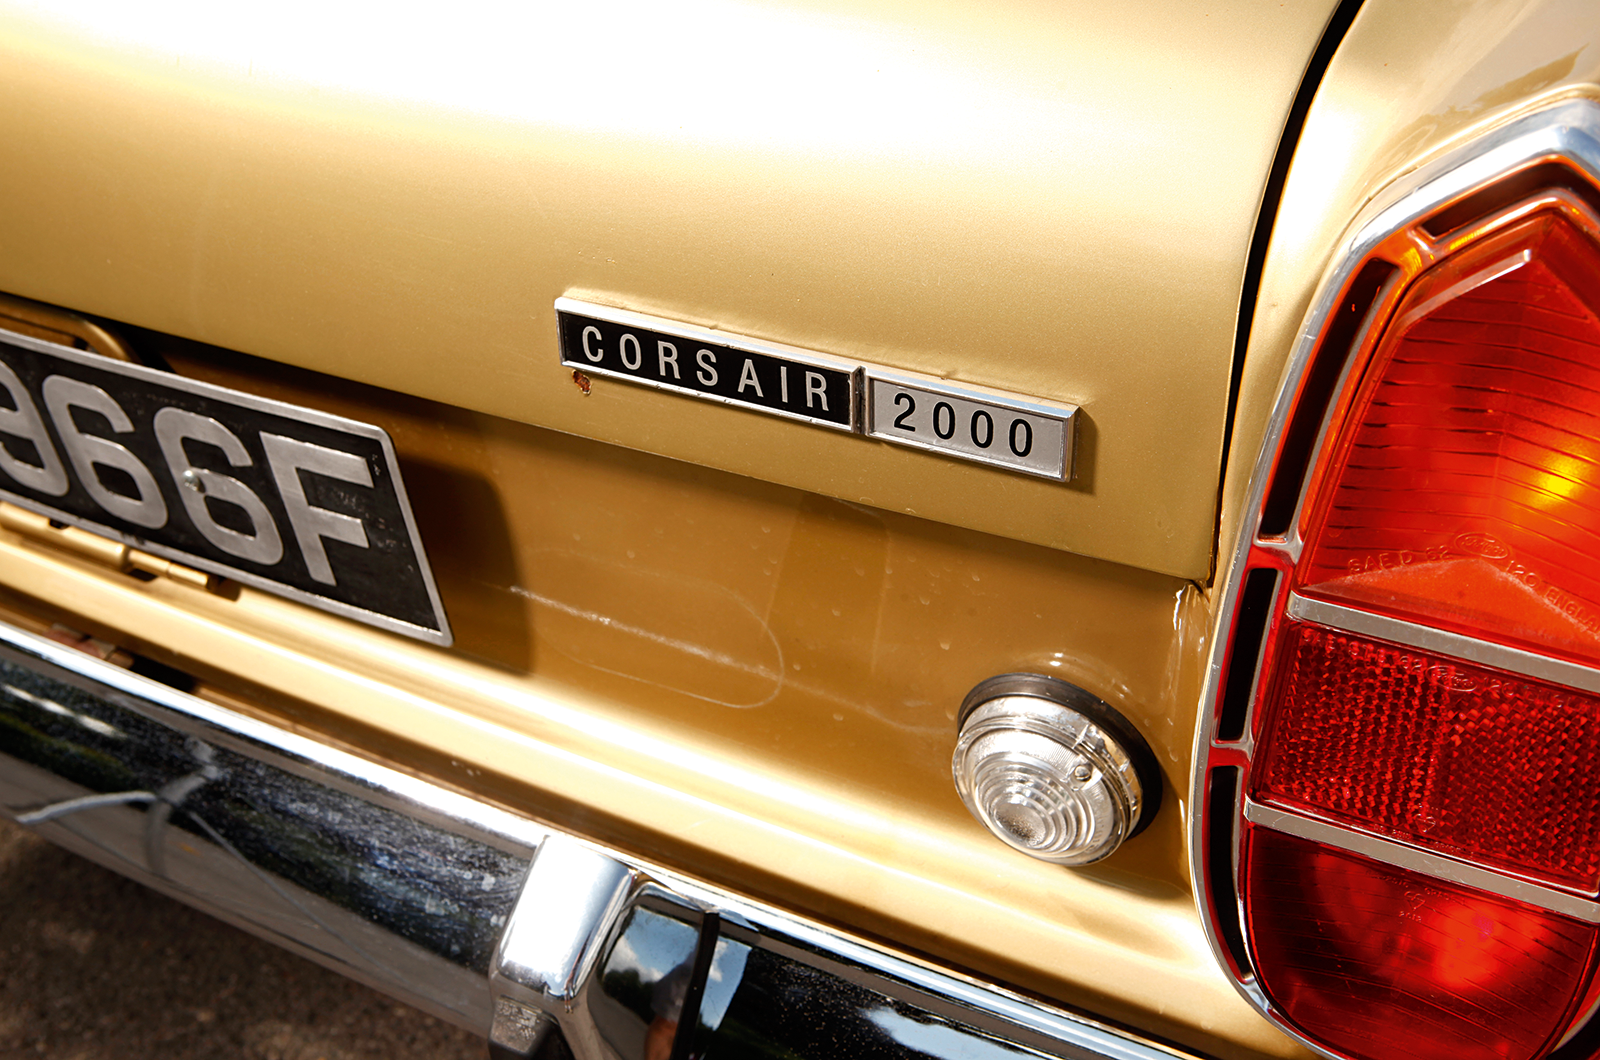 Classic & Sports Car – Ford Corsair: the Thunderbird from Halewood